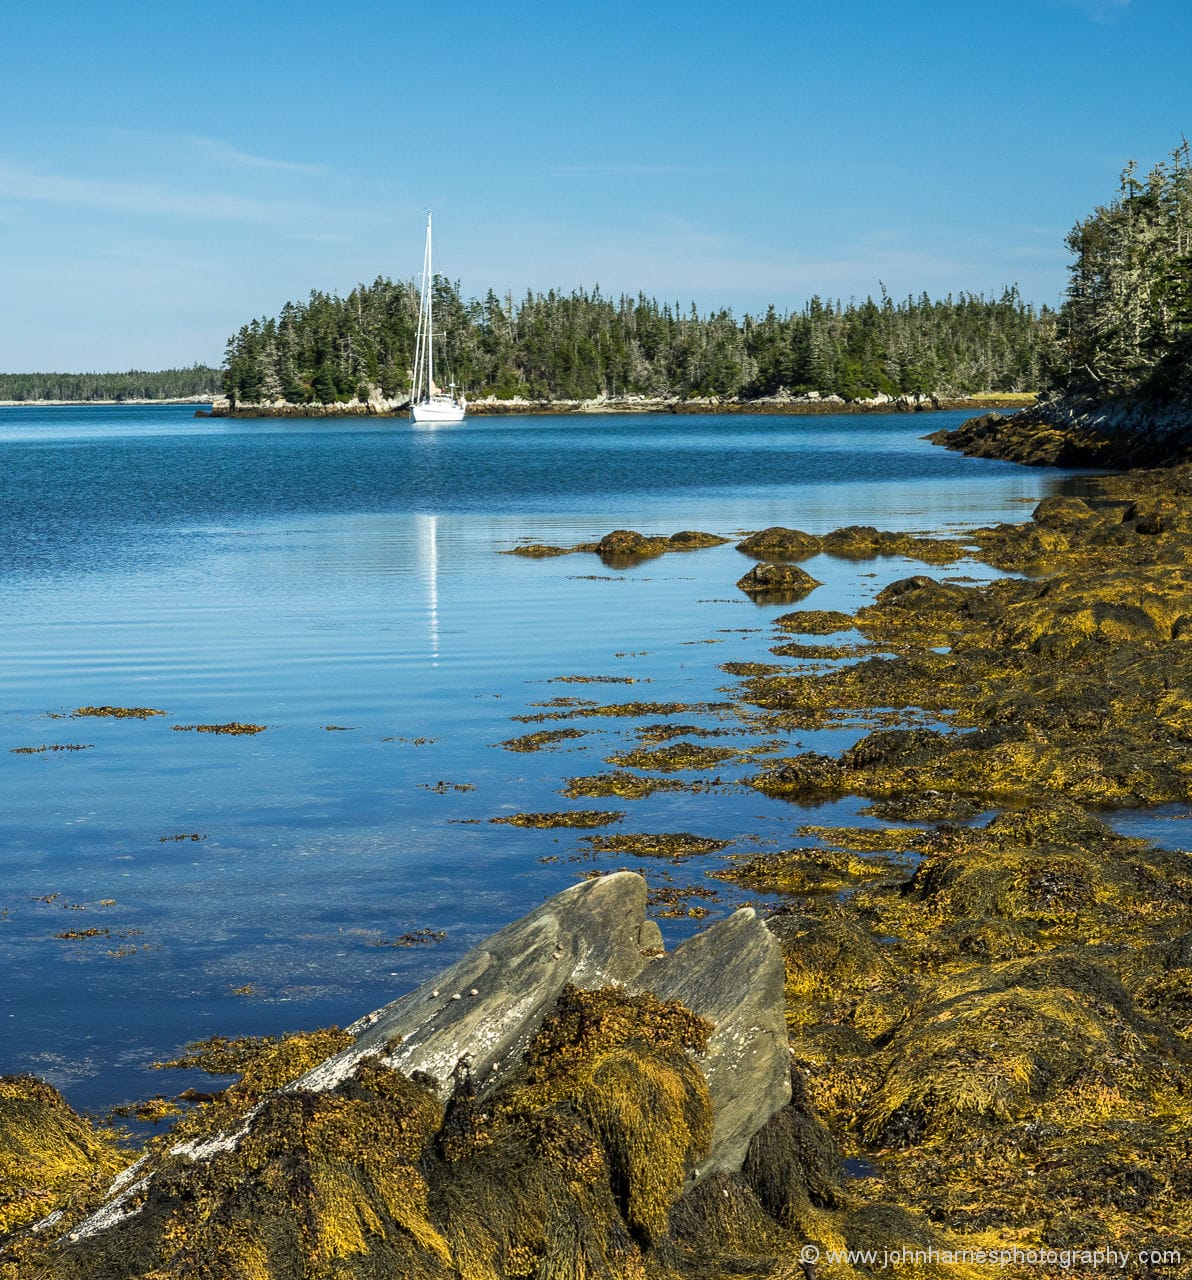 Shelter Cove, Nova Scotia—An Aptly-Named Anchorage